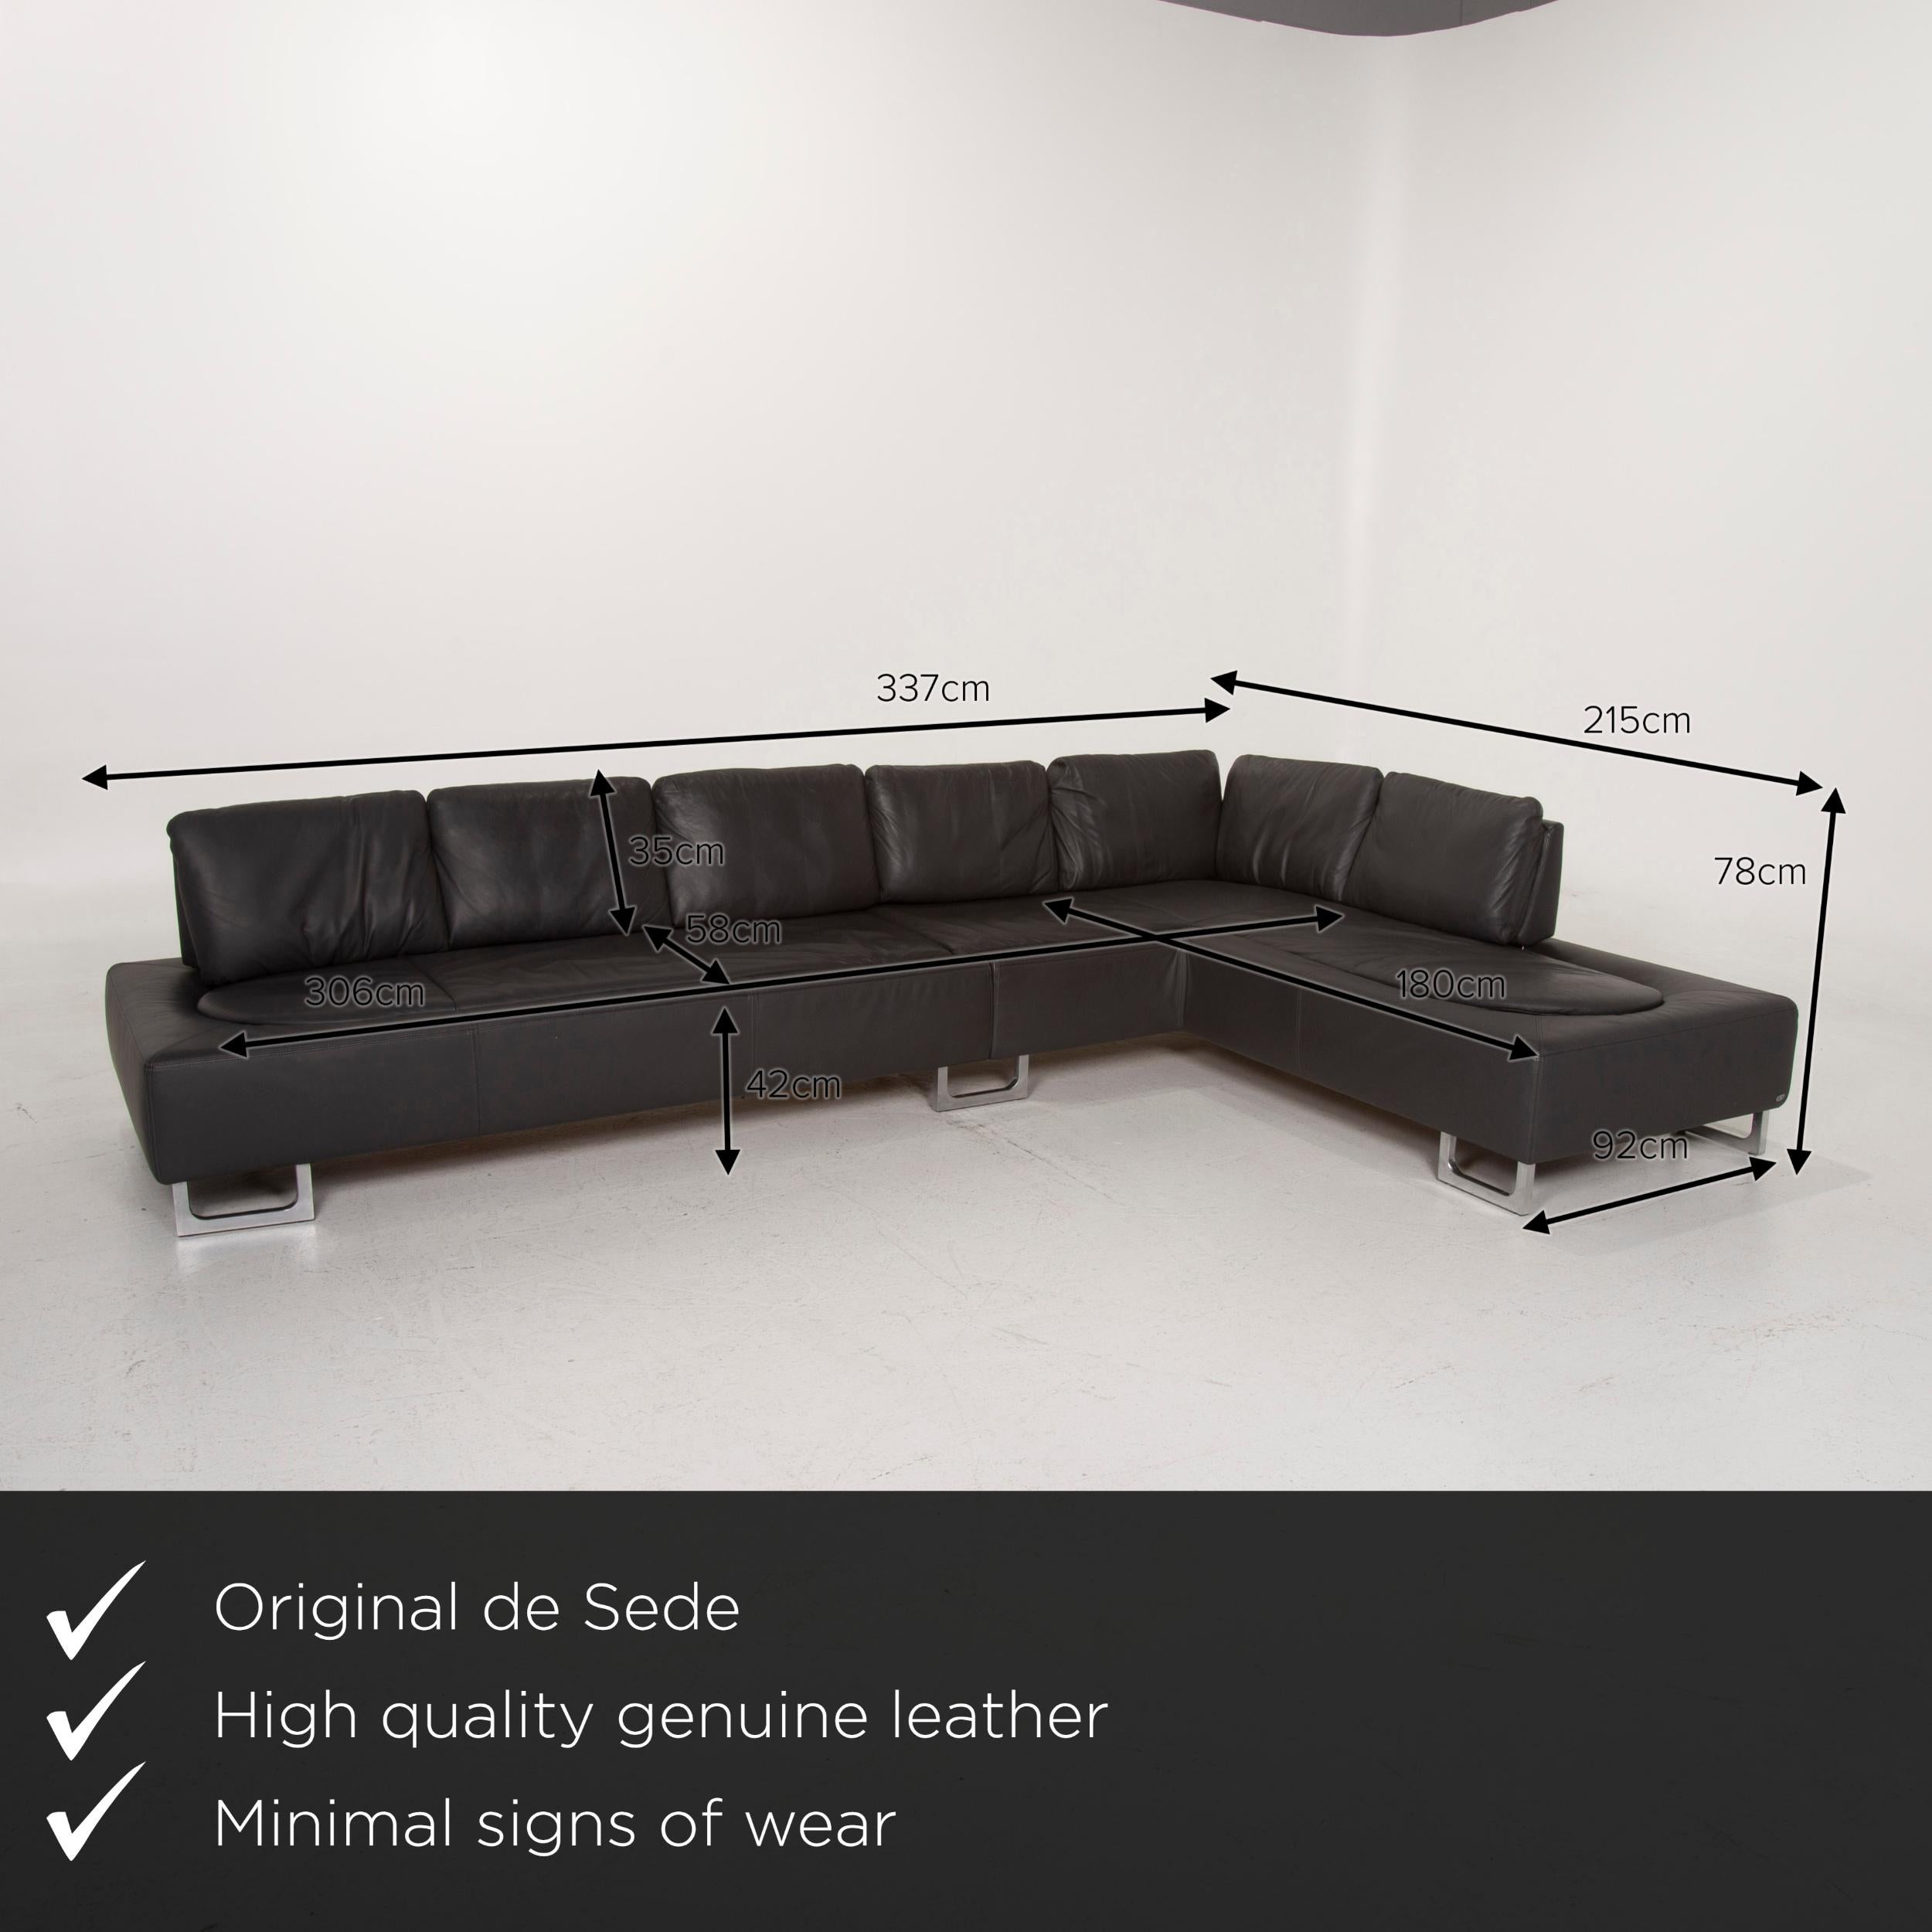 We present to you a De Sede ds 165 leather sofa anthracite corner sofa function.
 

 Product measurements in centimeters:
 

Depth 92
Width 337
Height 78
Seat height 42
Seat depth 58
Seat width 306
Back height 35.

 